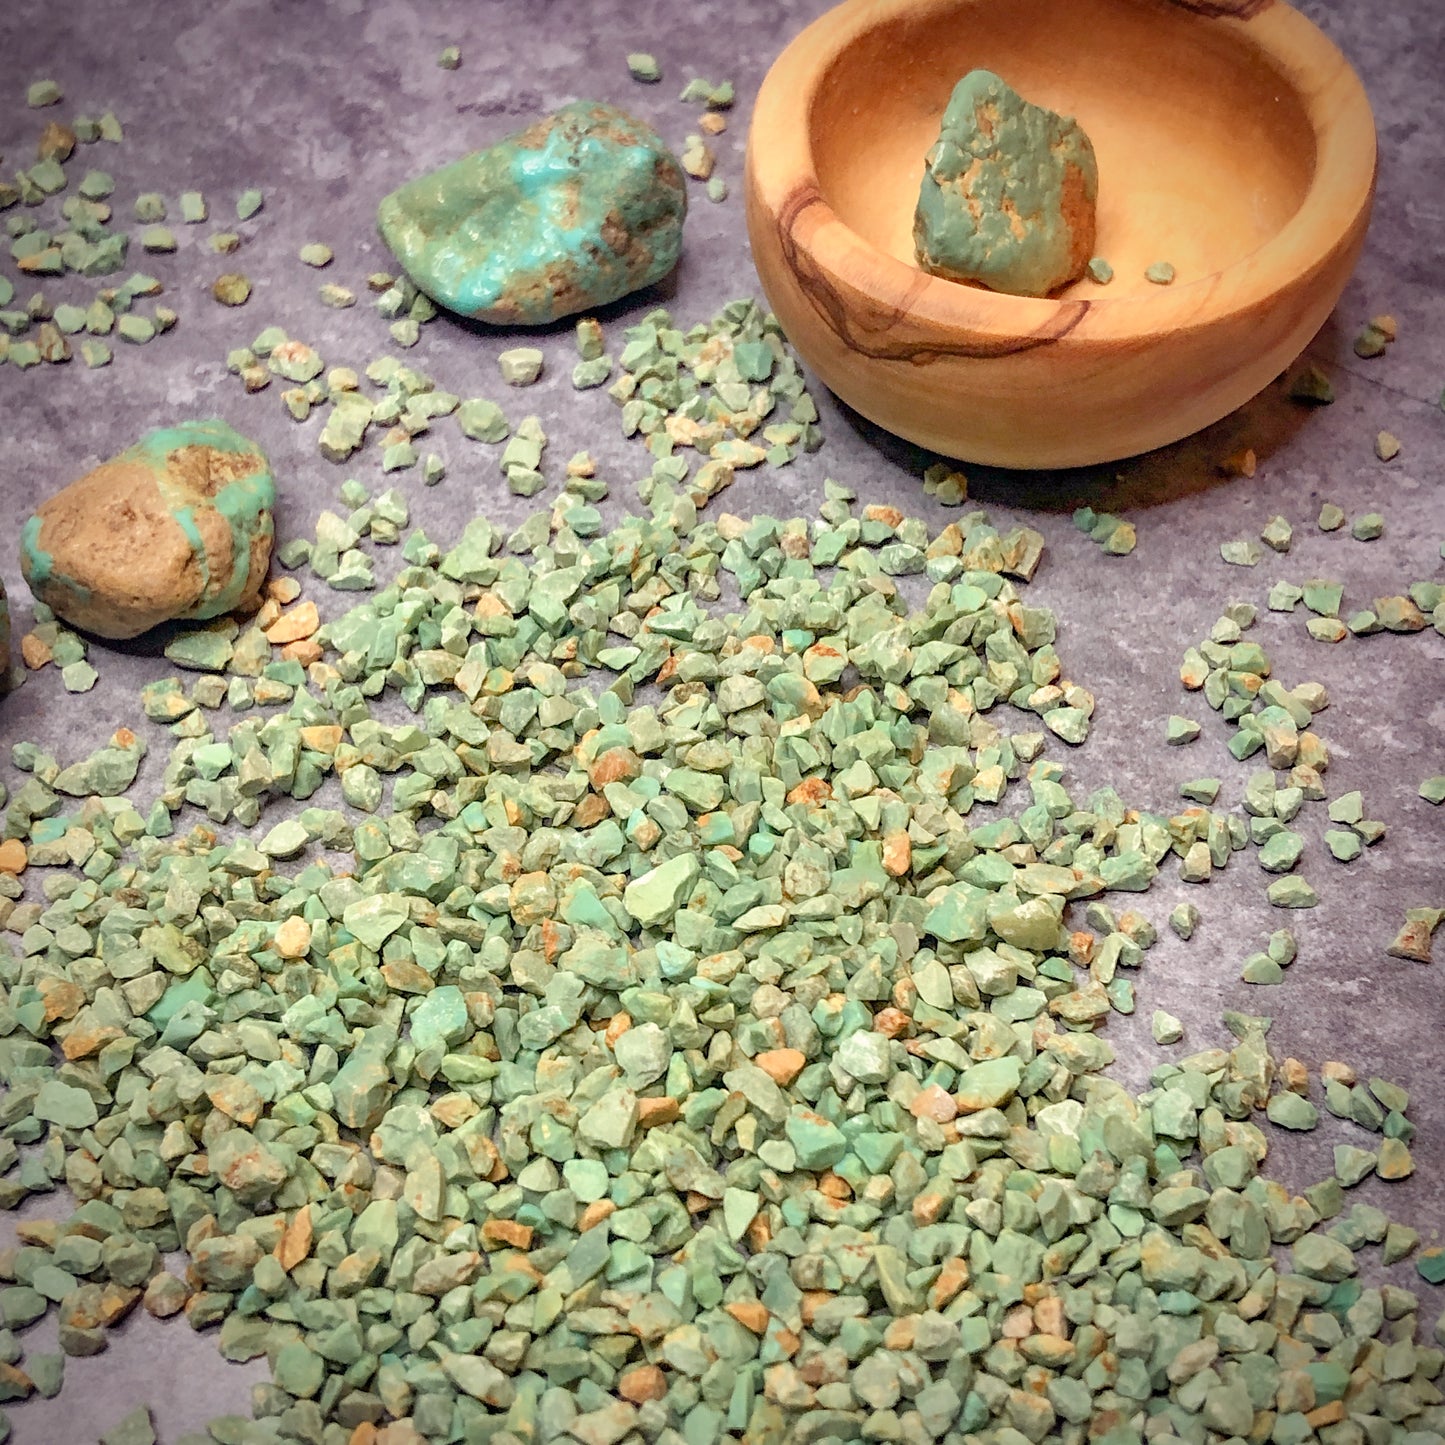 Crushed Green Sonoran Turquoise from Mexico, Coarse Crush, Gravel Size, 4mm - 2mm